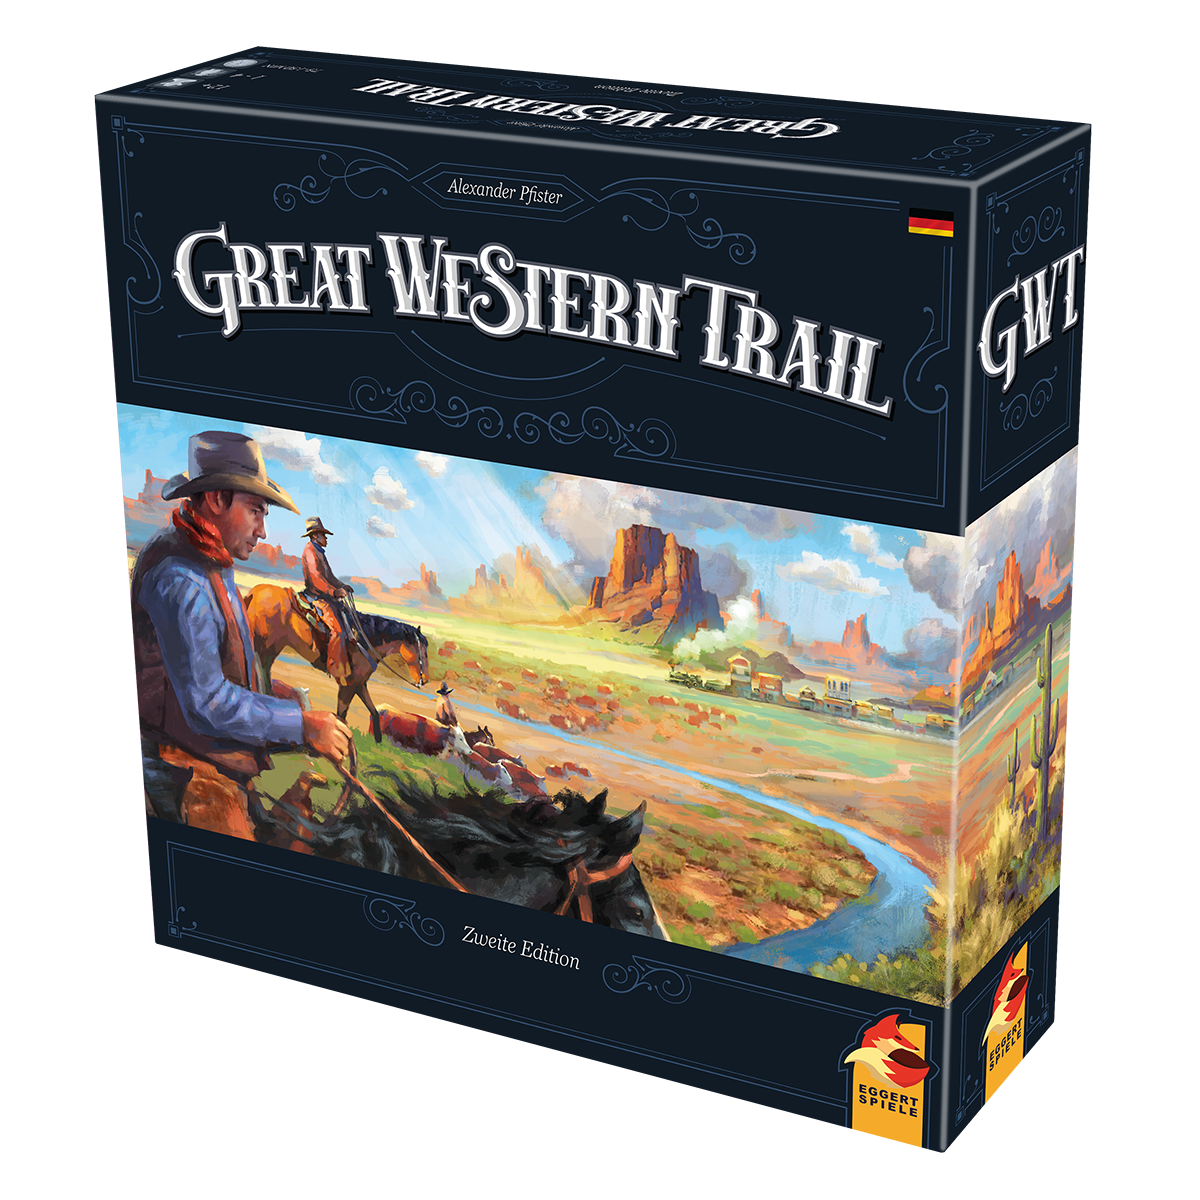 Great Western Trail - 2nd Edition